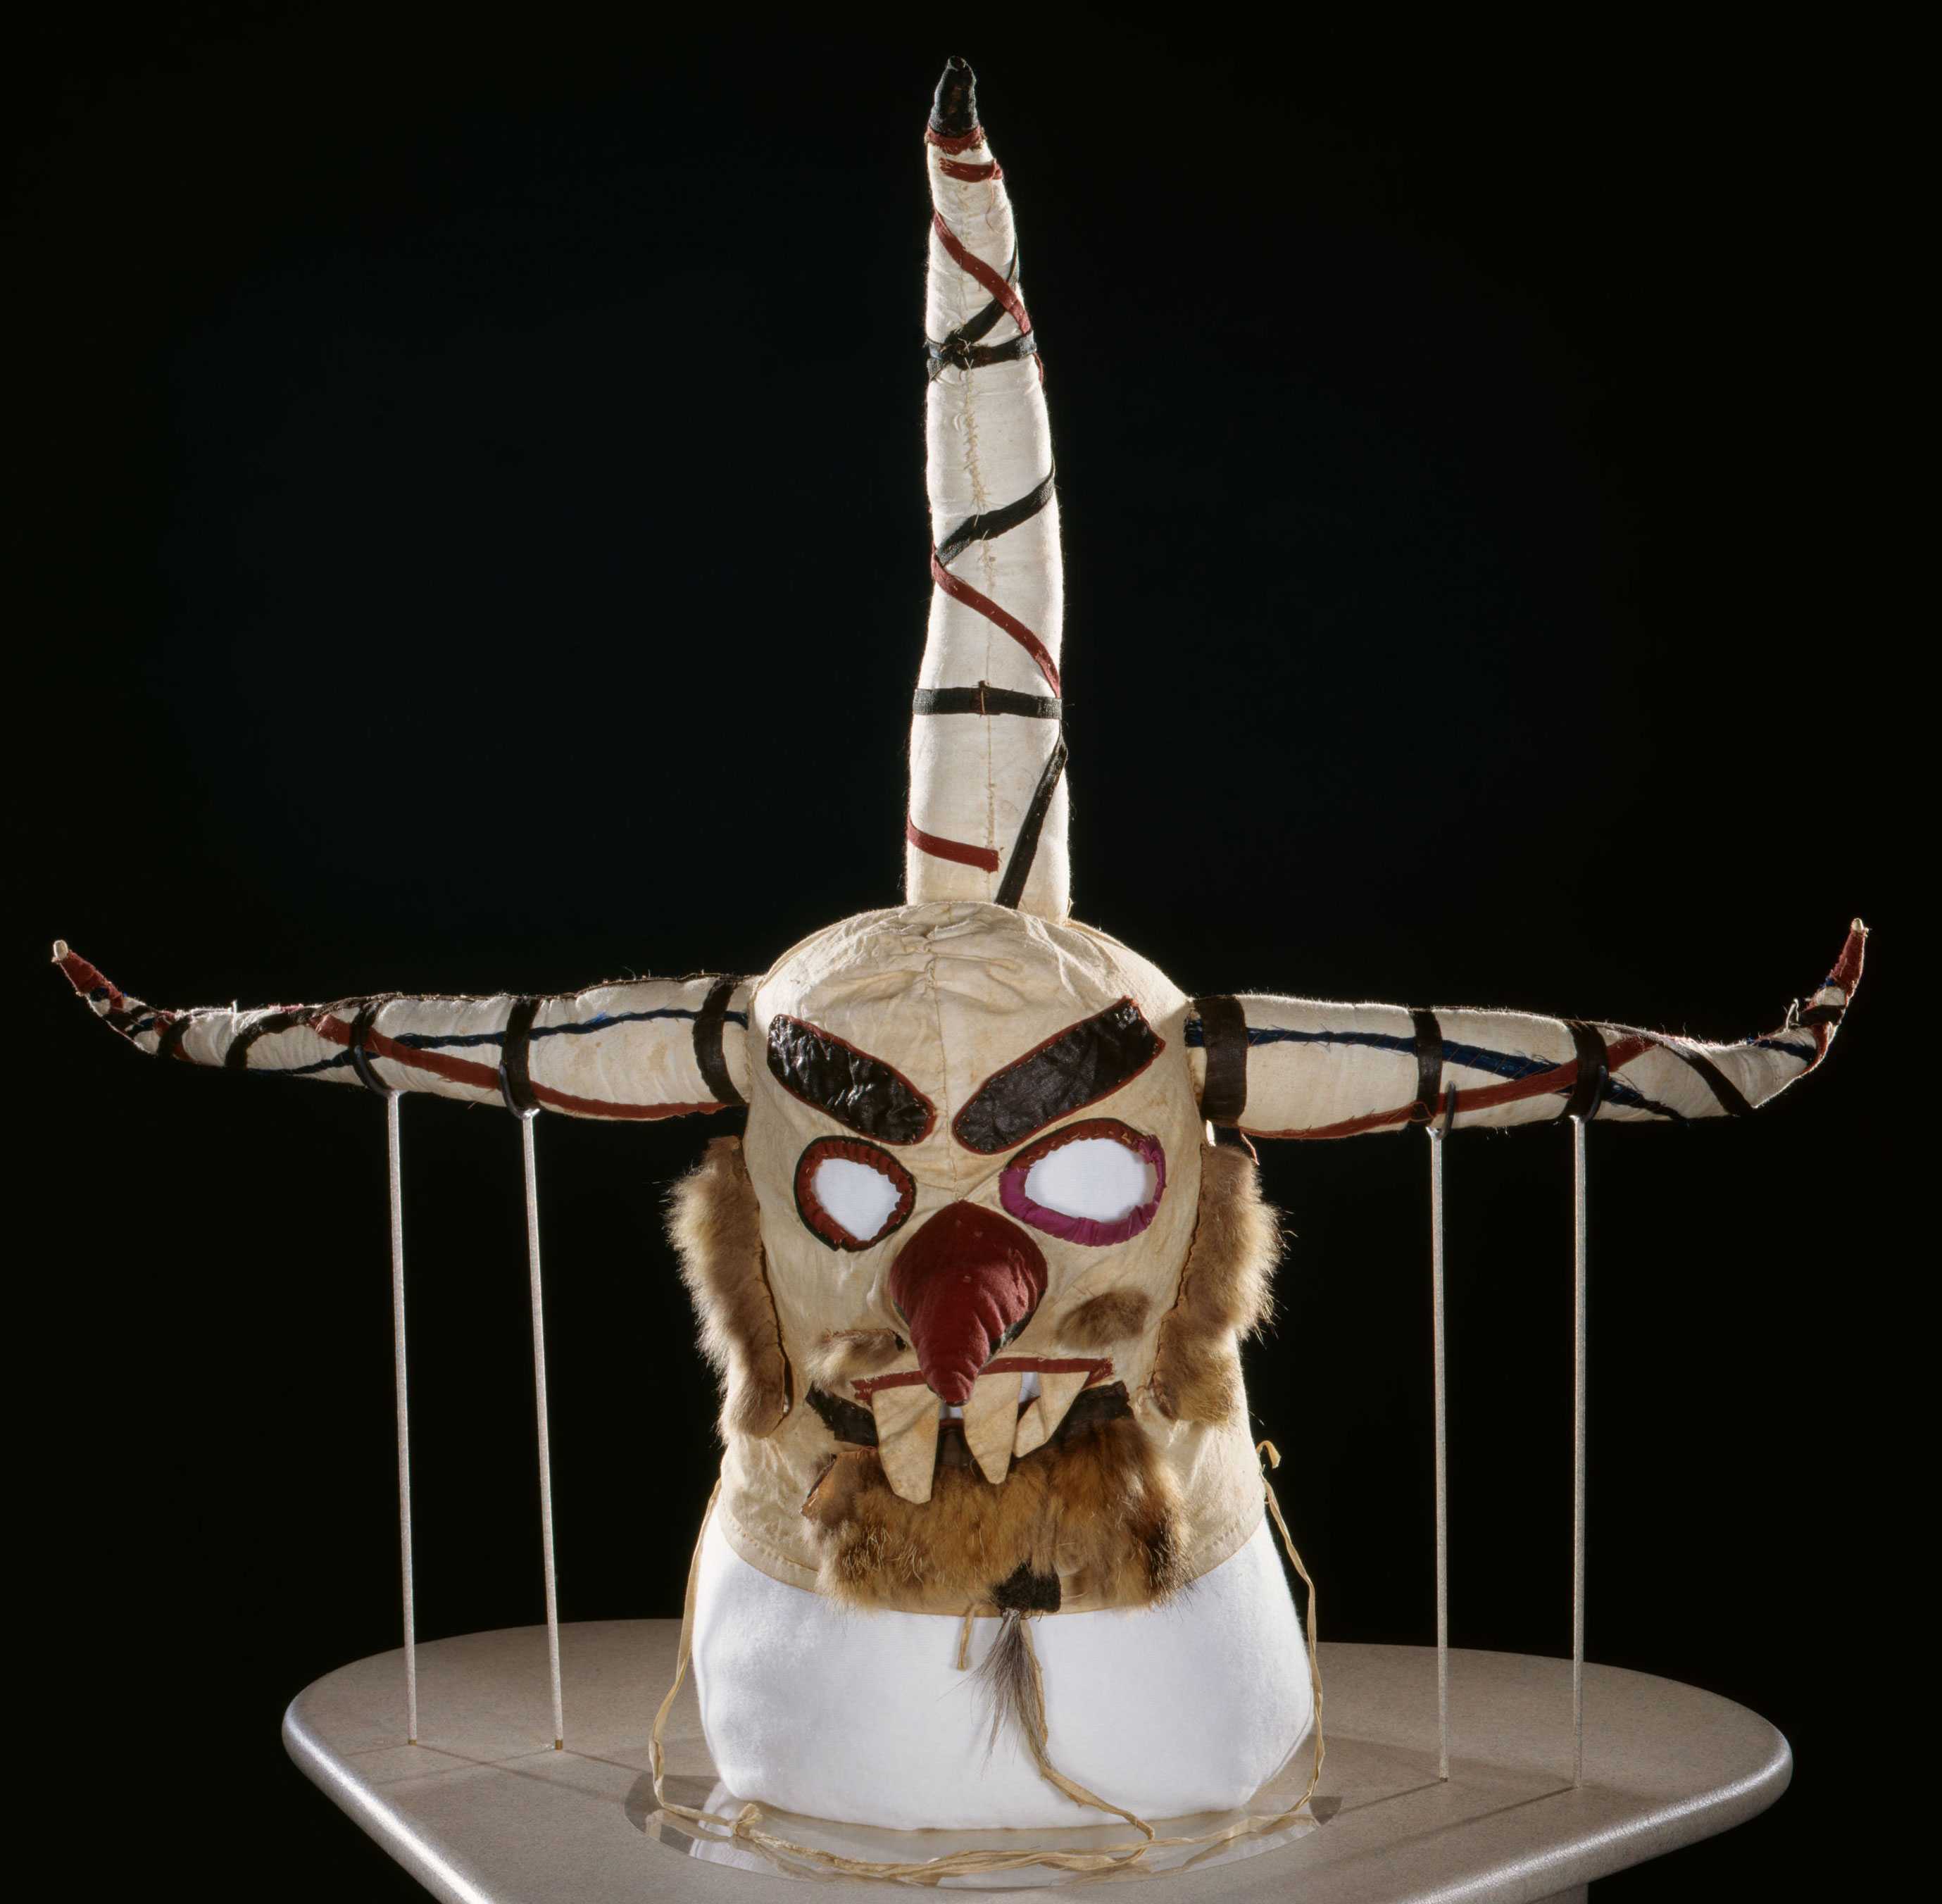 Face mask with red eyes and nose and three horns decorated in black and red.  There is fur representing facial hair.